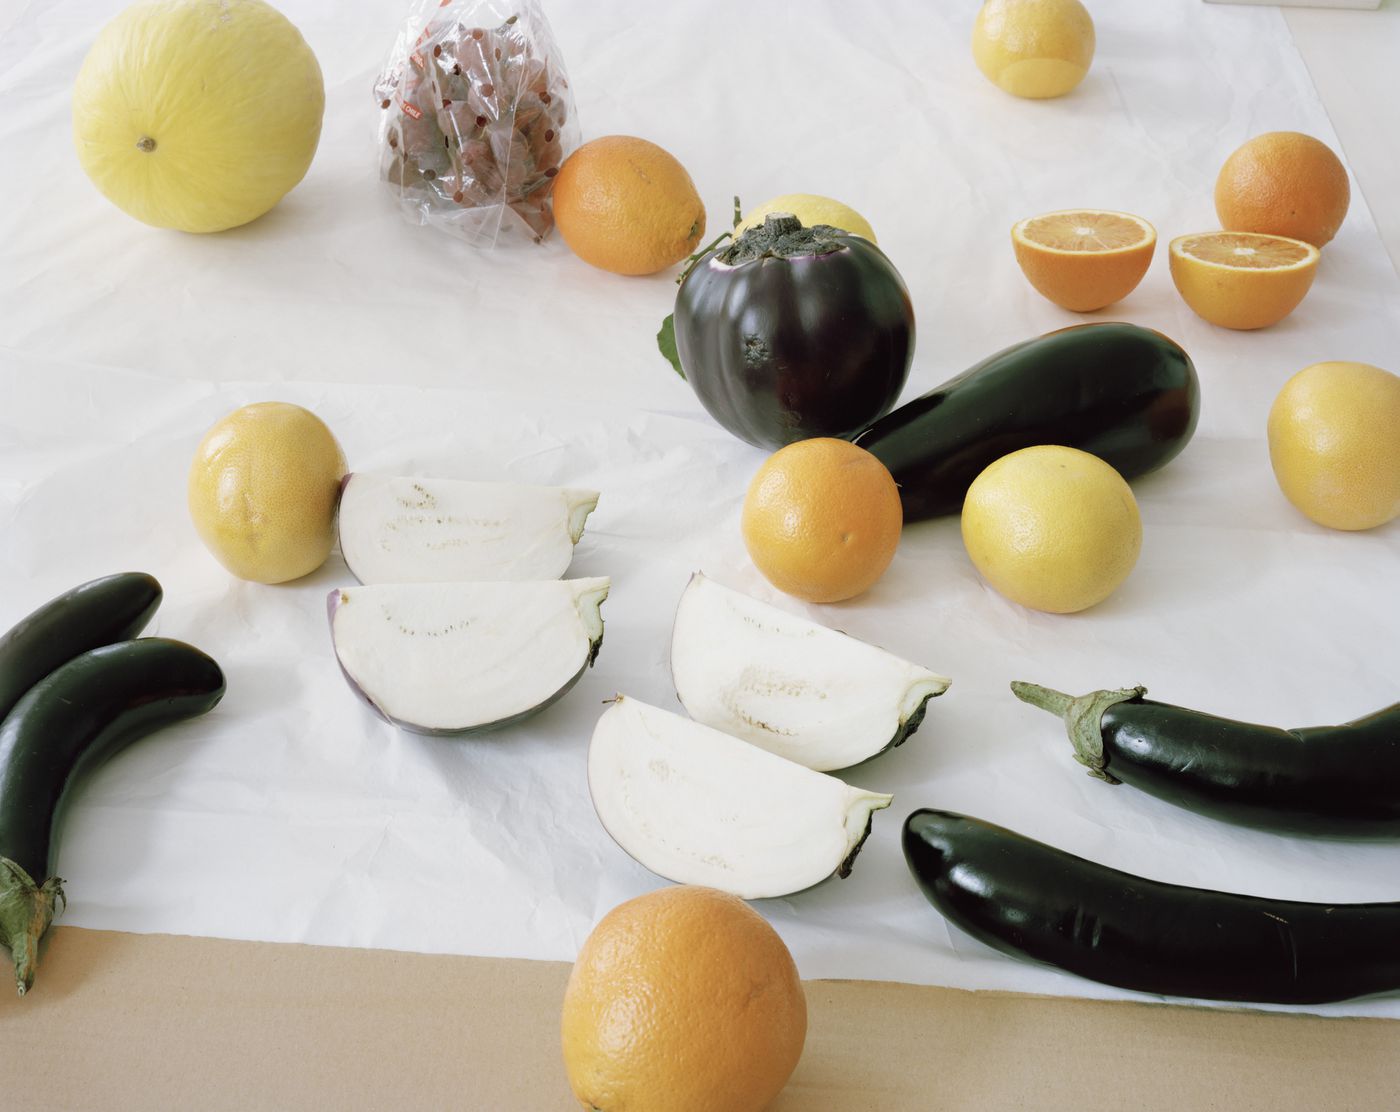 Nature Morte with Lemons, Melons and a Few Oranges, Zucchini